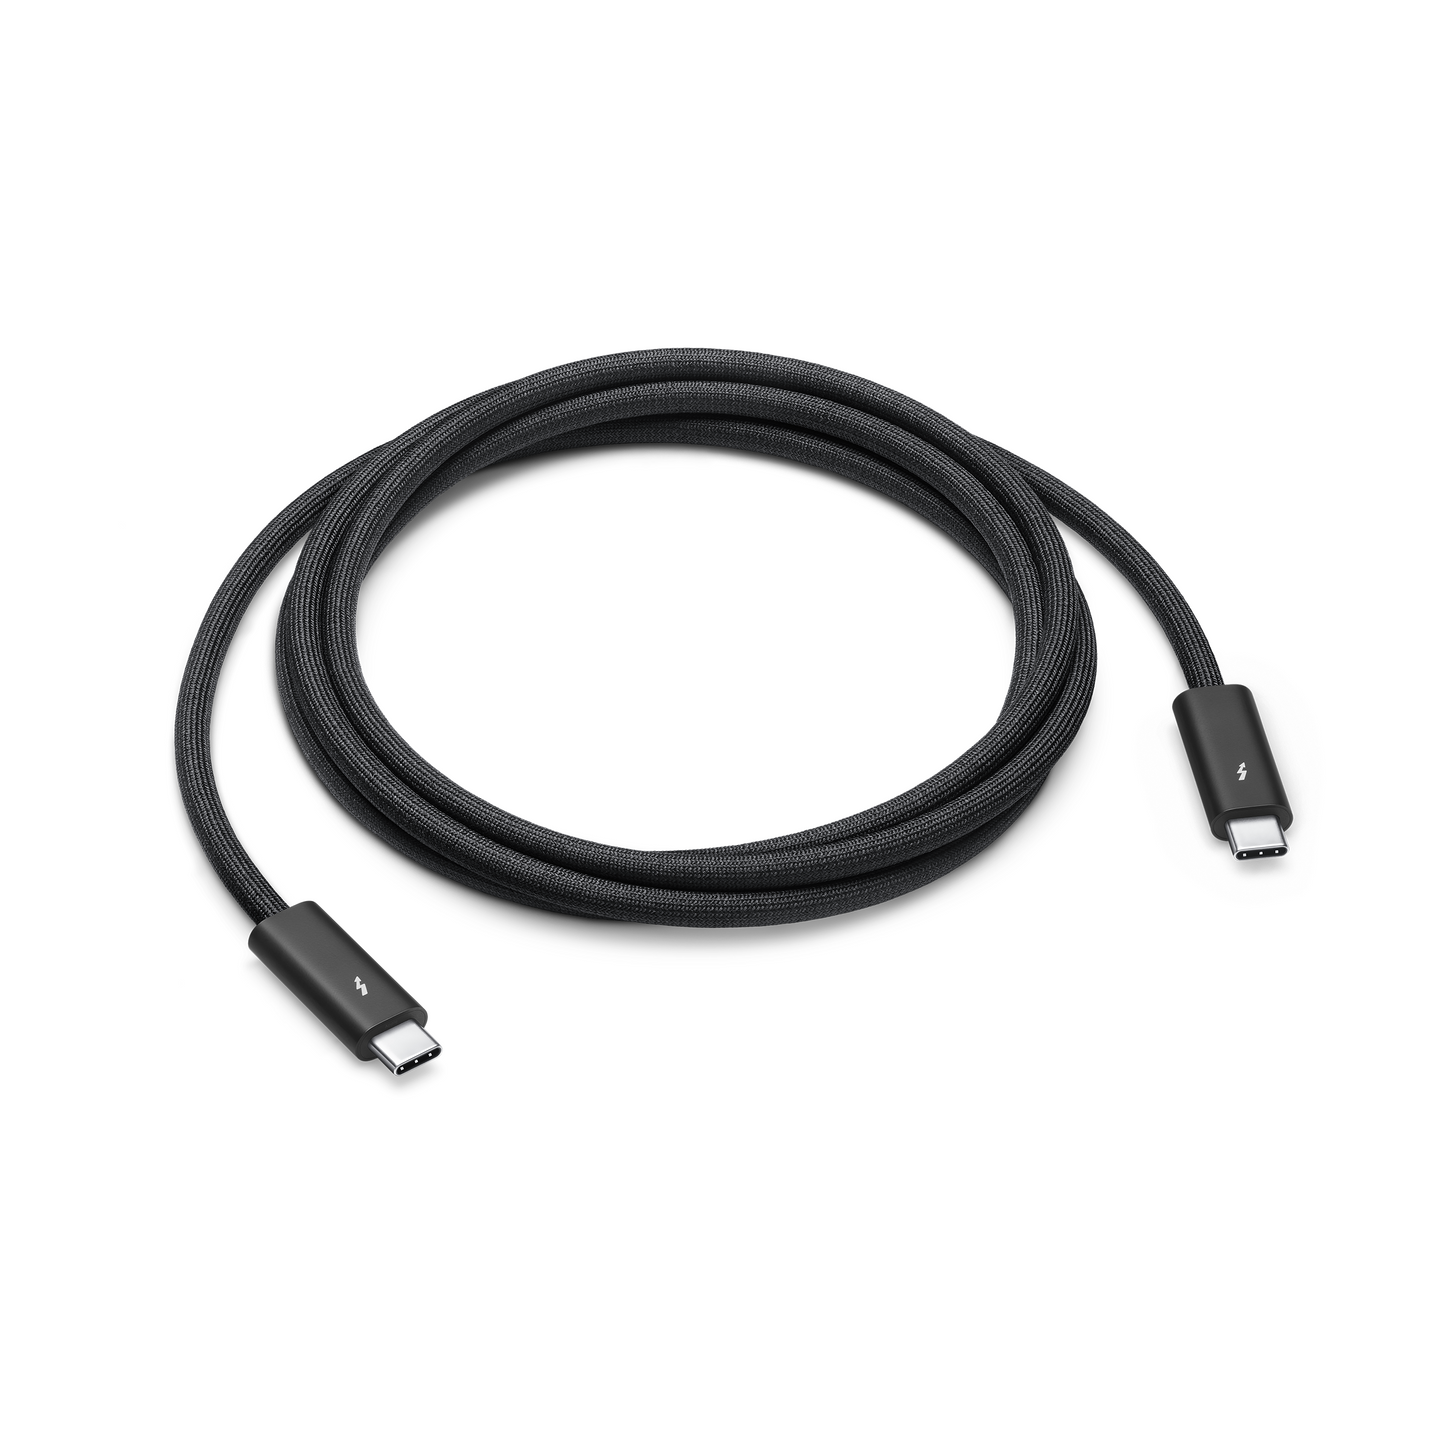 Apple Thunderbolt 4 Pro Cable - 1.8m (6 Foot)